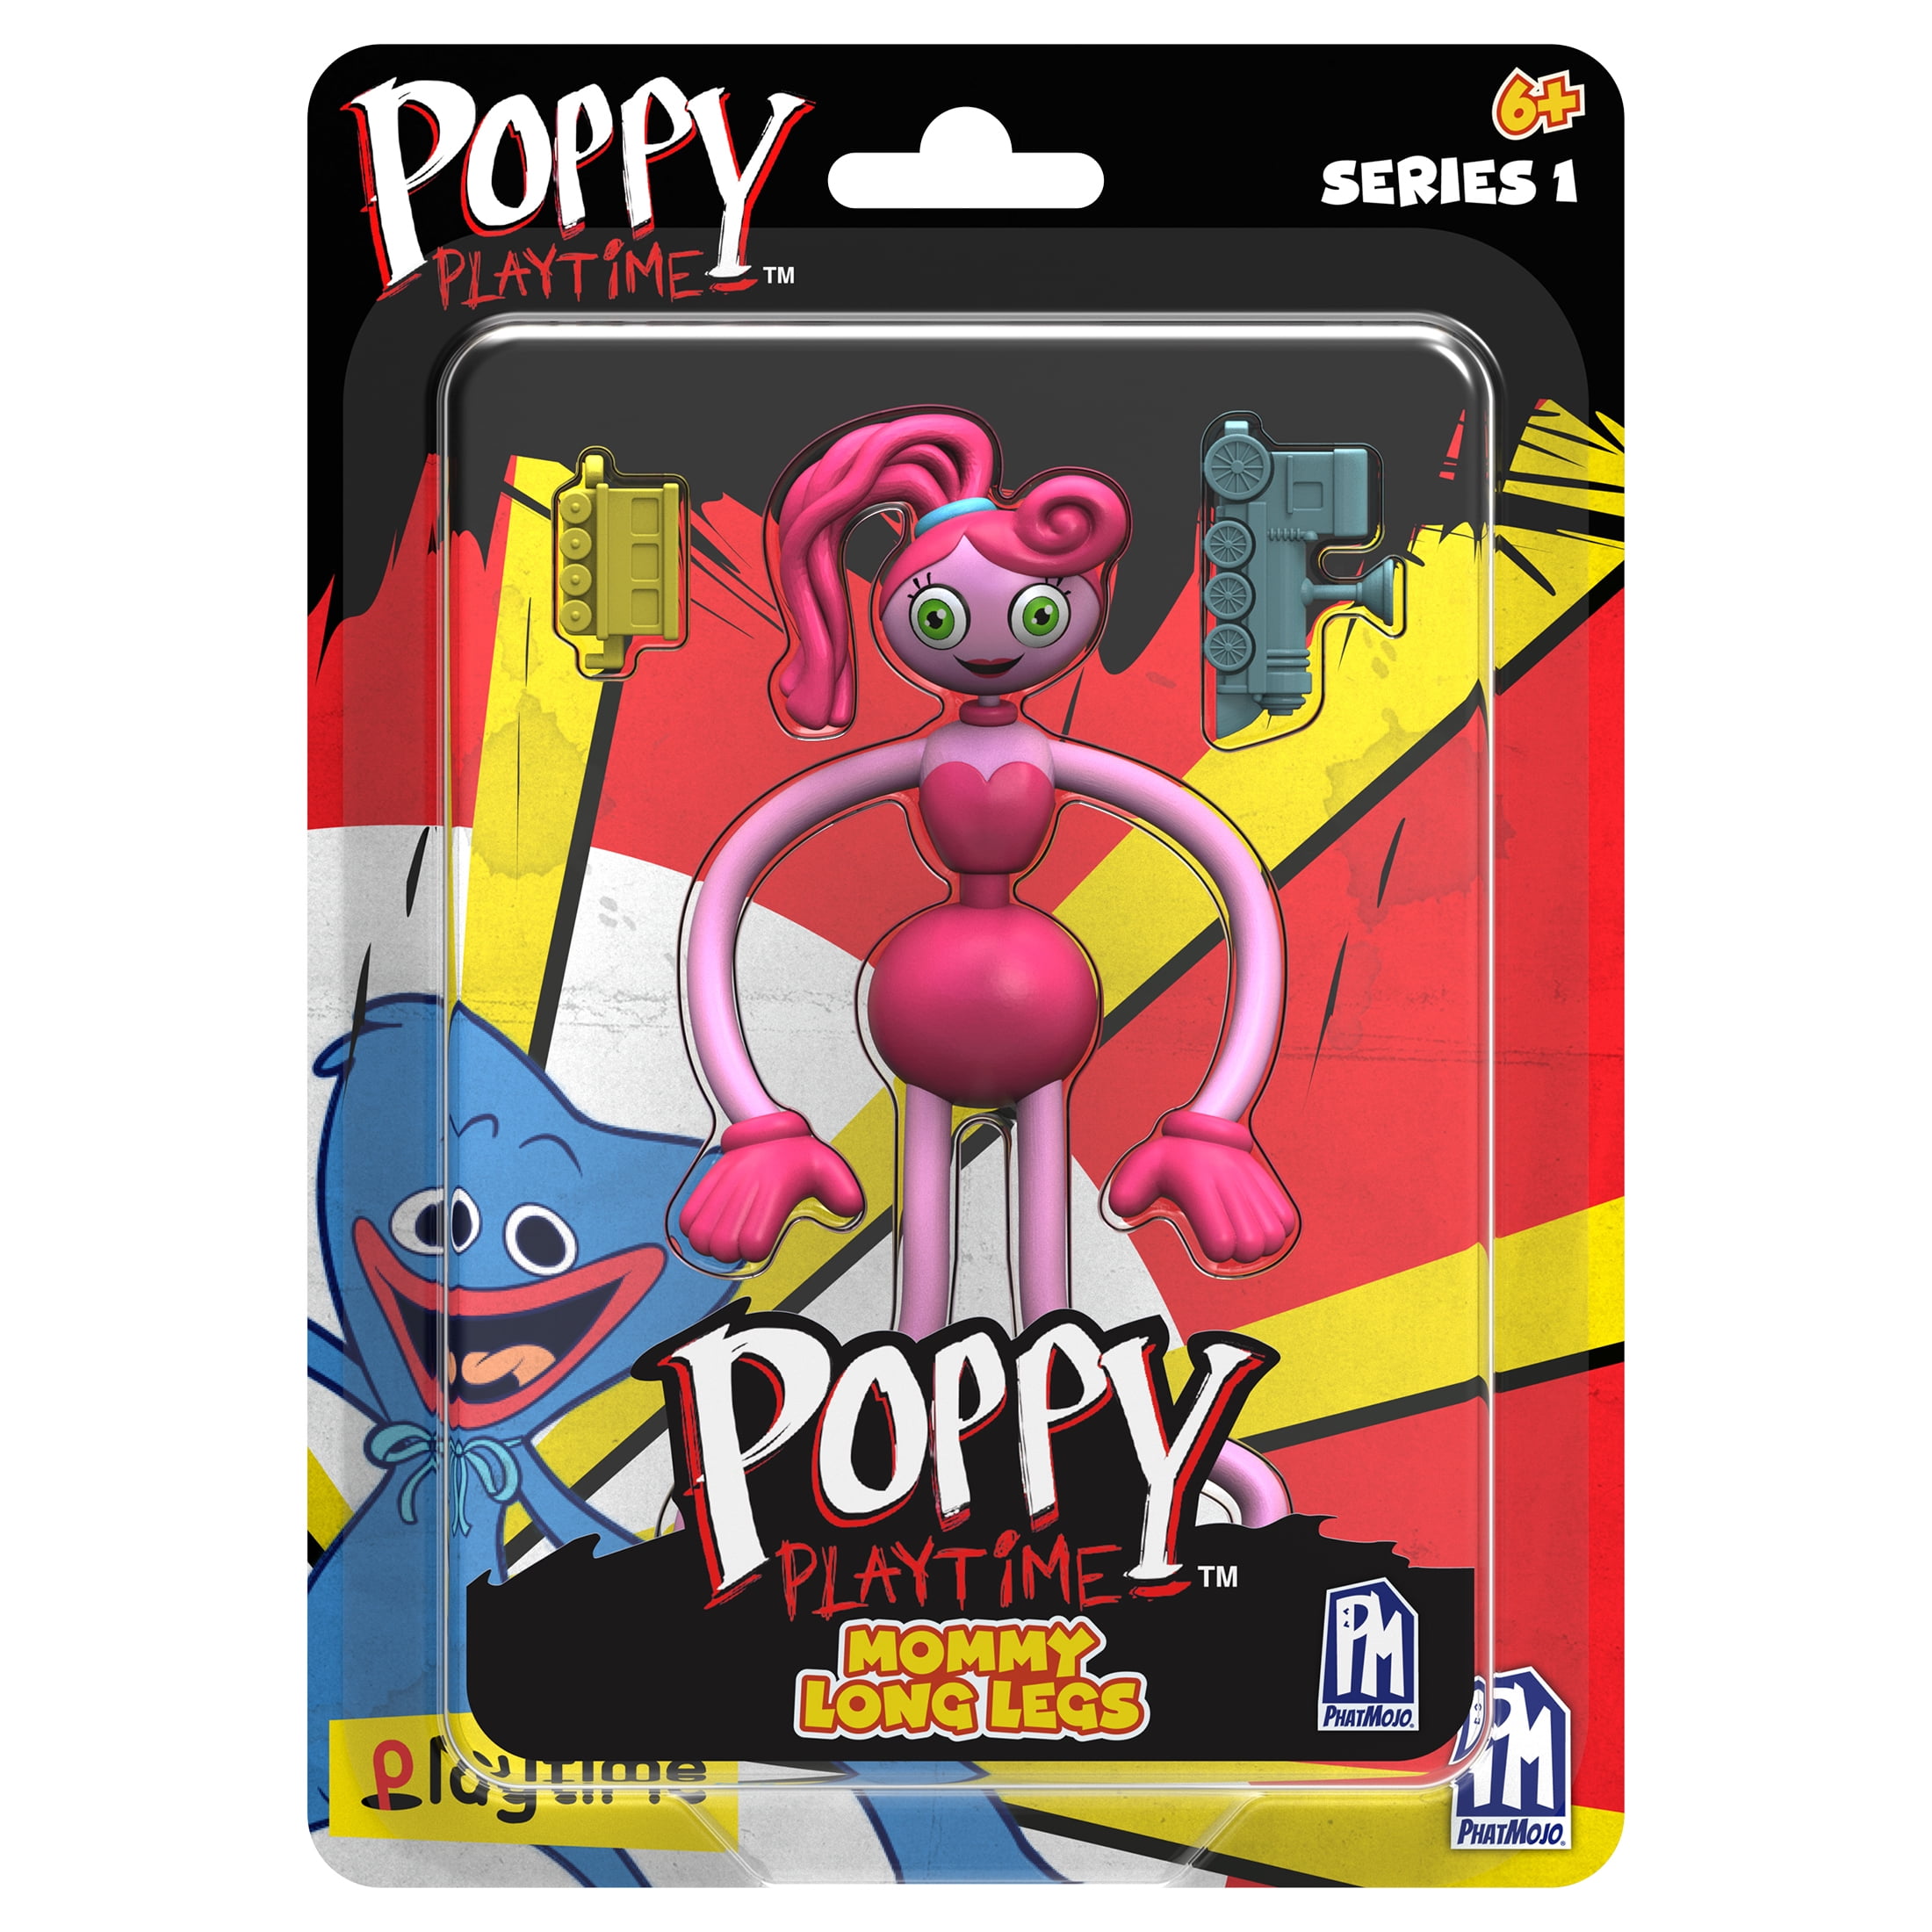 POPPY PLAYTIME - Mommy Long Legs - 5 inch Action Figure (Series 1